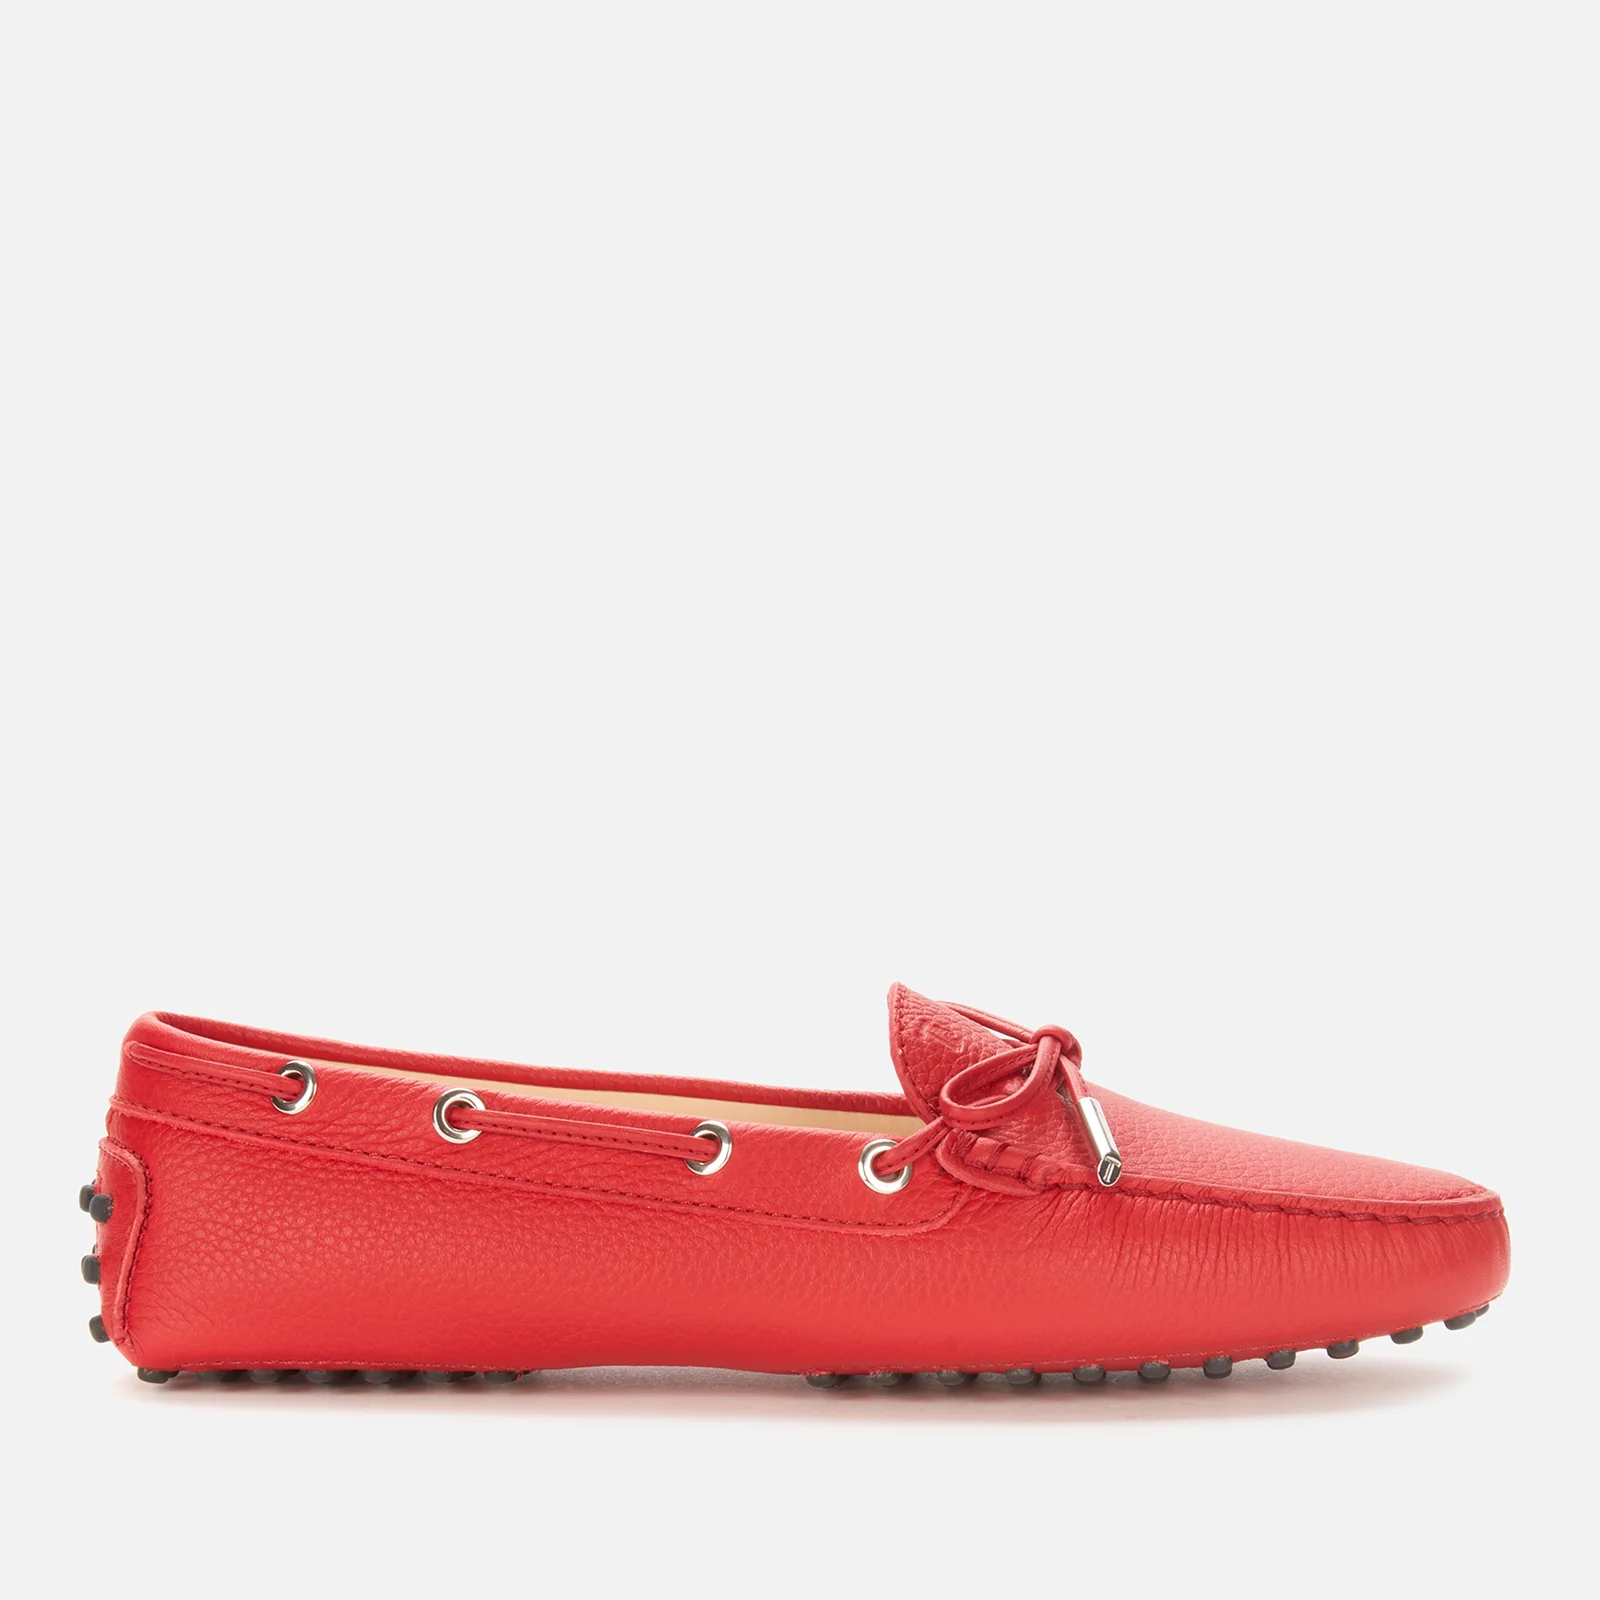 Tod's Women's Heaven Suede Driving Shoes - Red Image 1